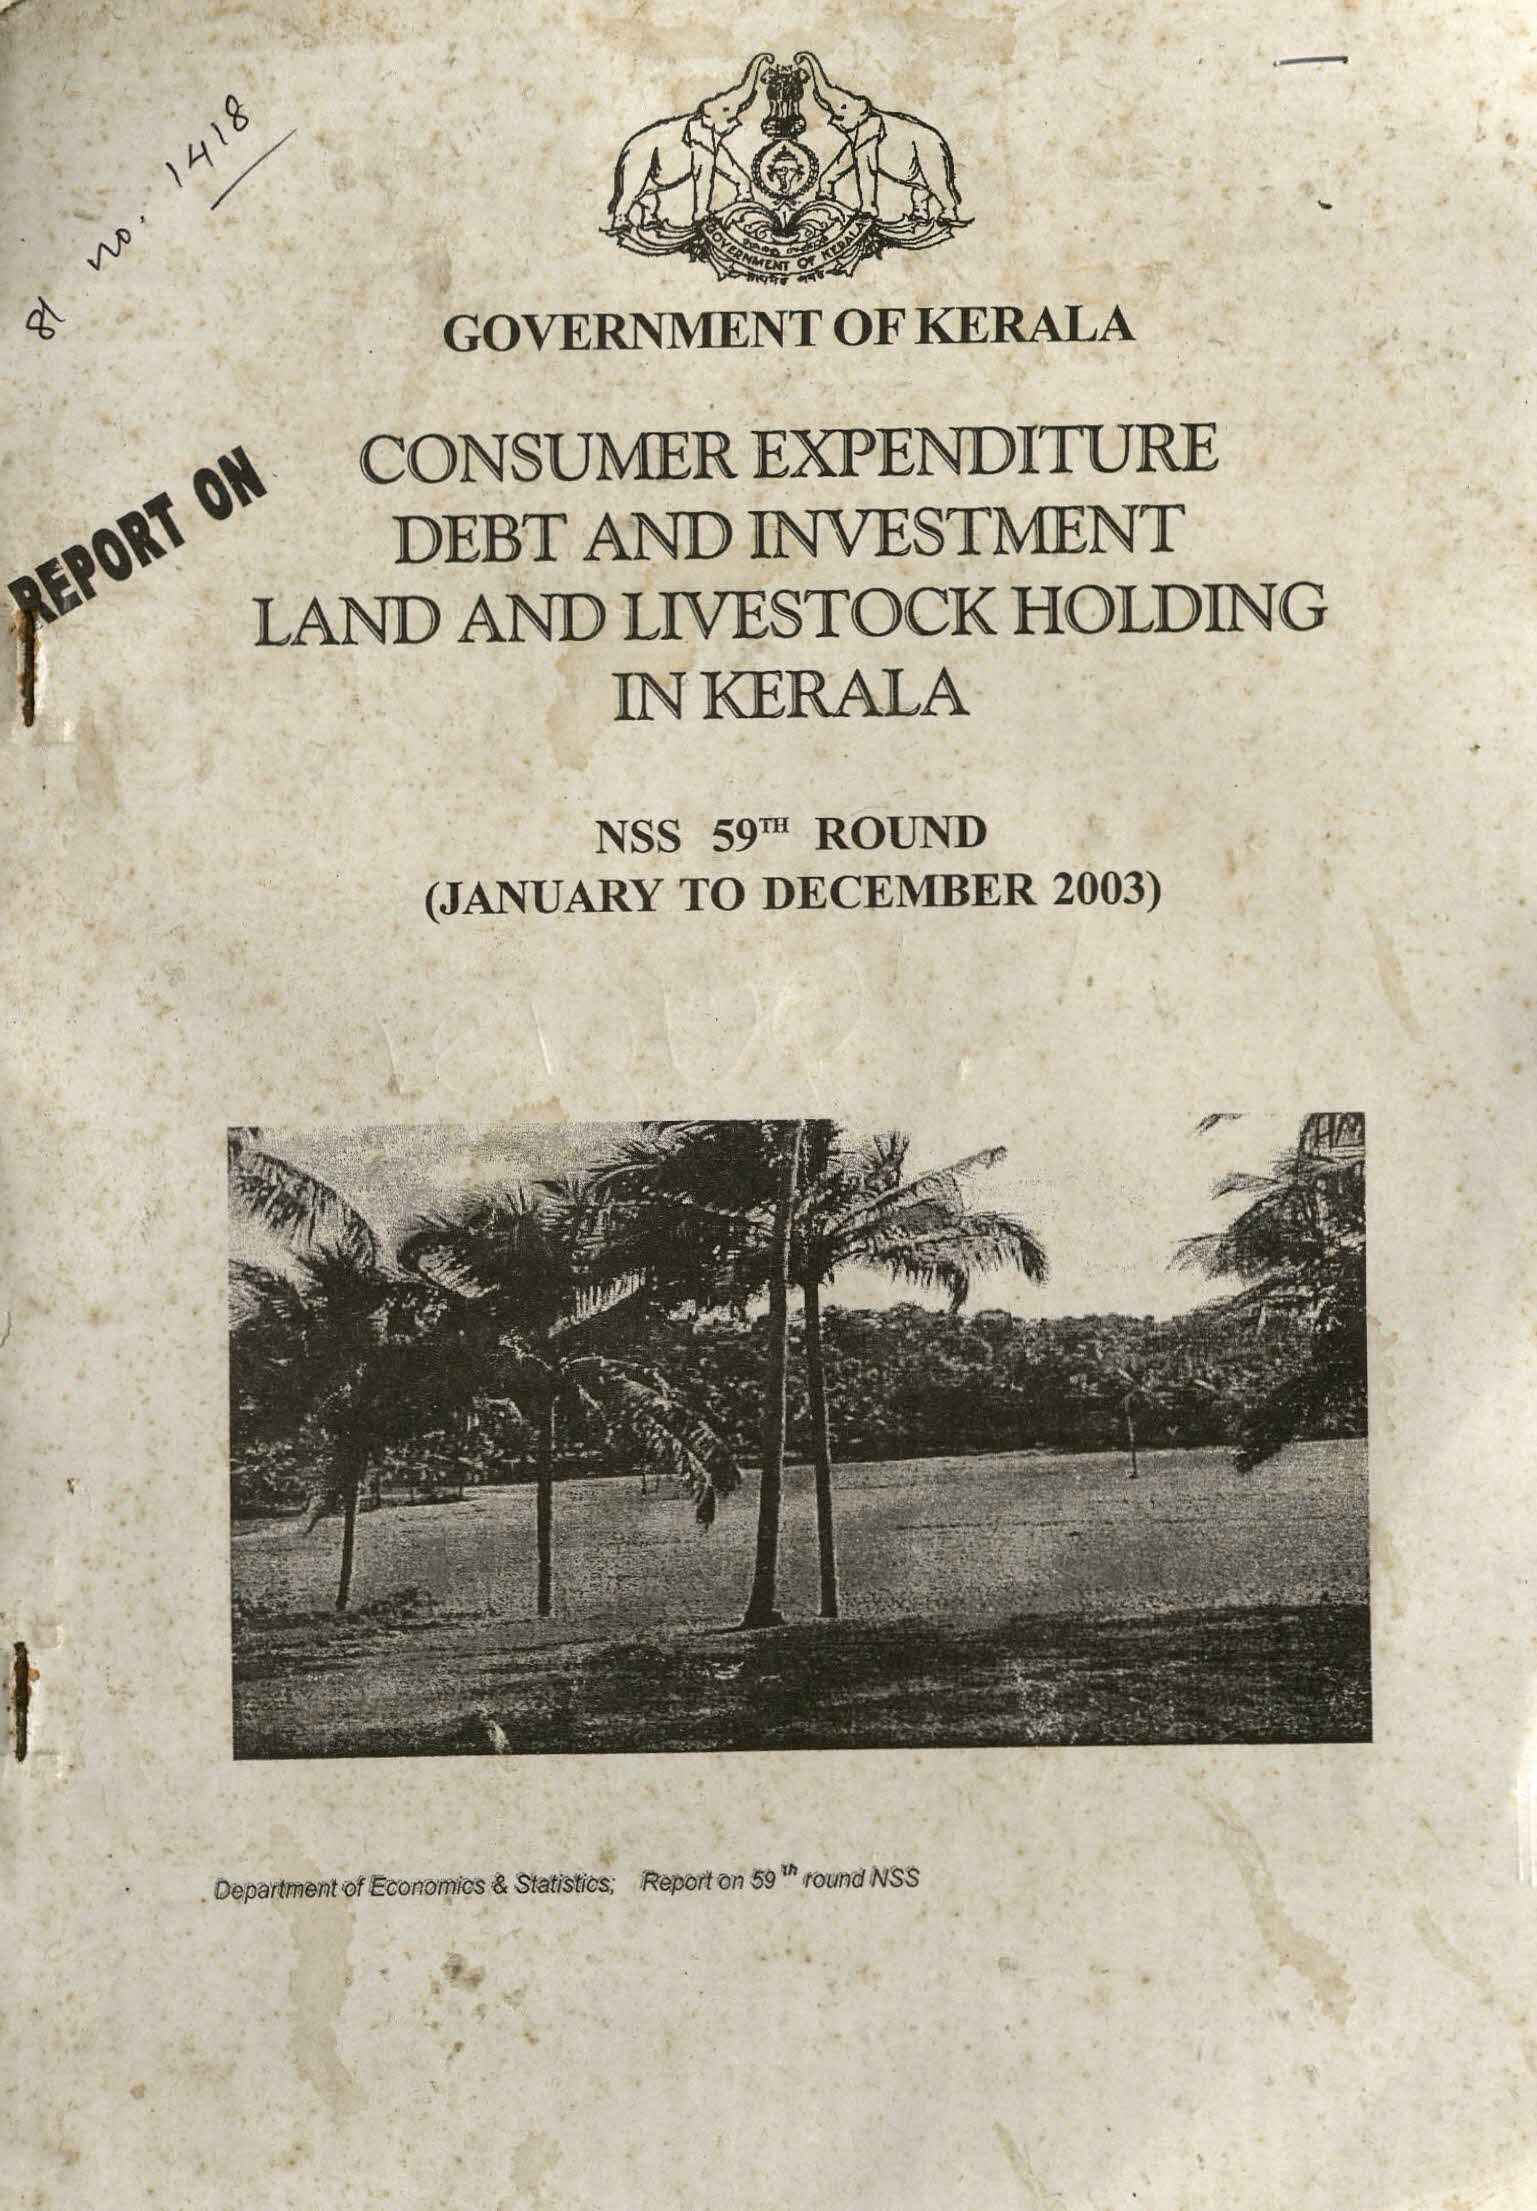 CONSUMER EXPENDITURE DEBT AND INVESTMENT LAND AND LIVESTOCK HOLDING IN KERALA -NSS 59TH ROUND